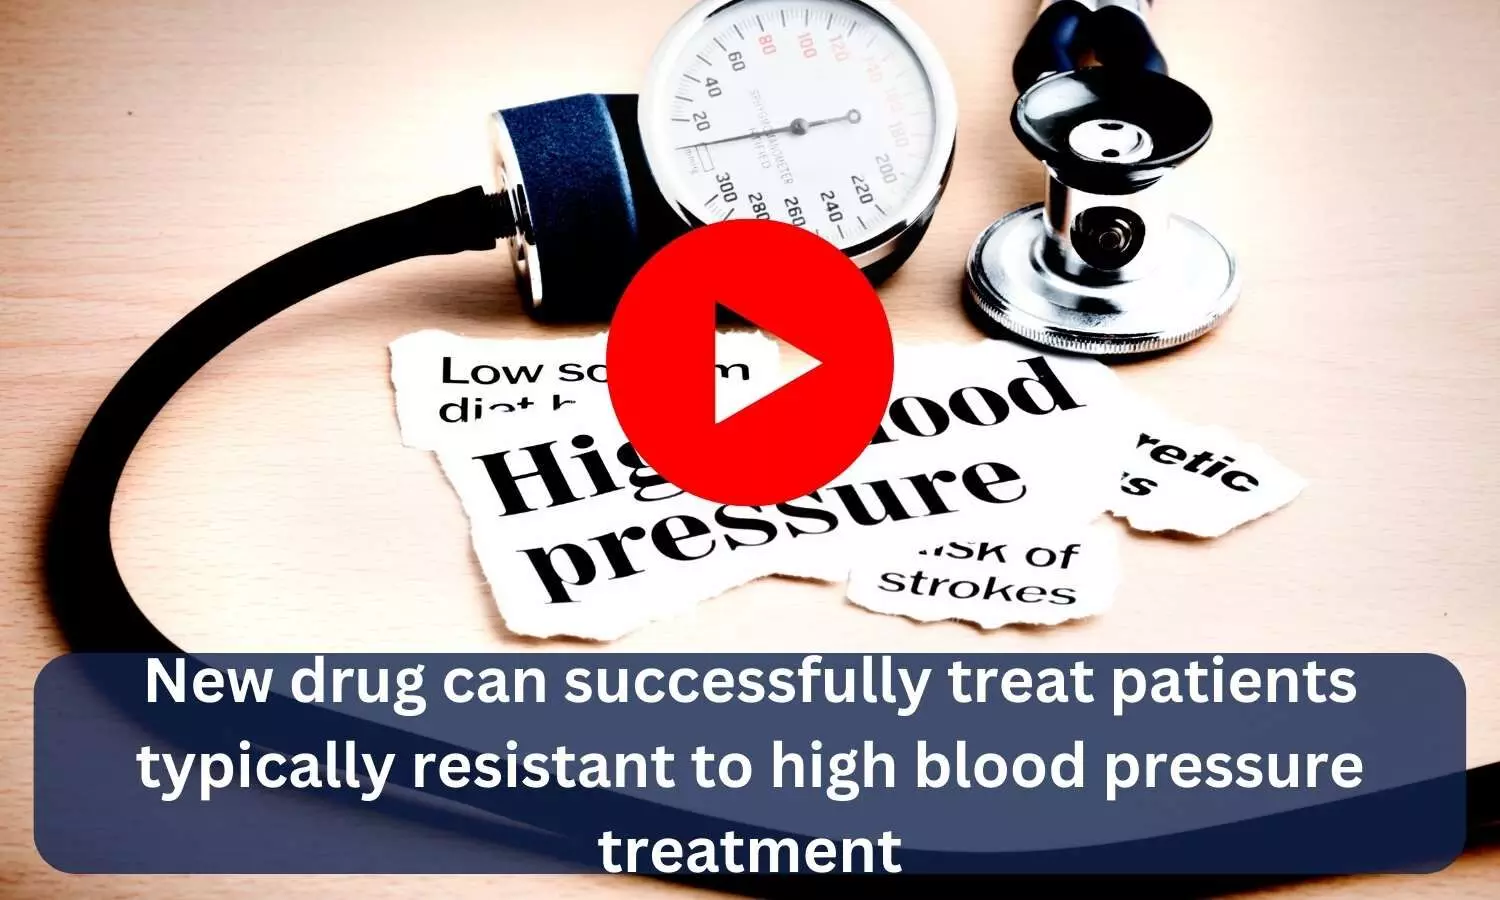 New drug can successfully treat patients typically resistant to high blood pressure treatment